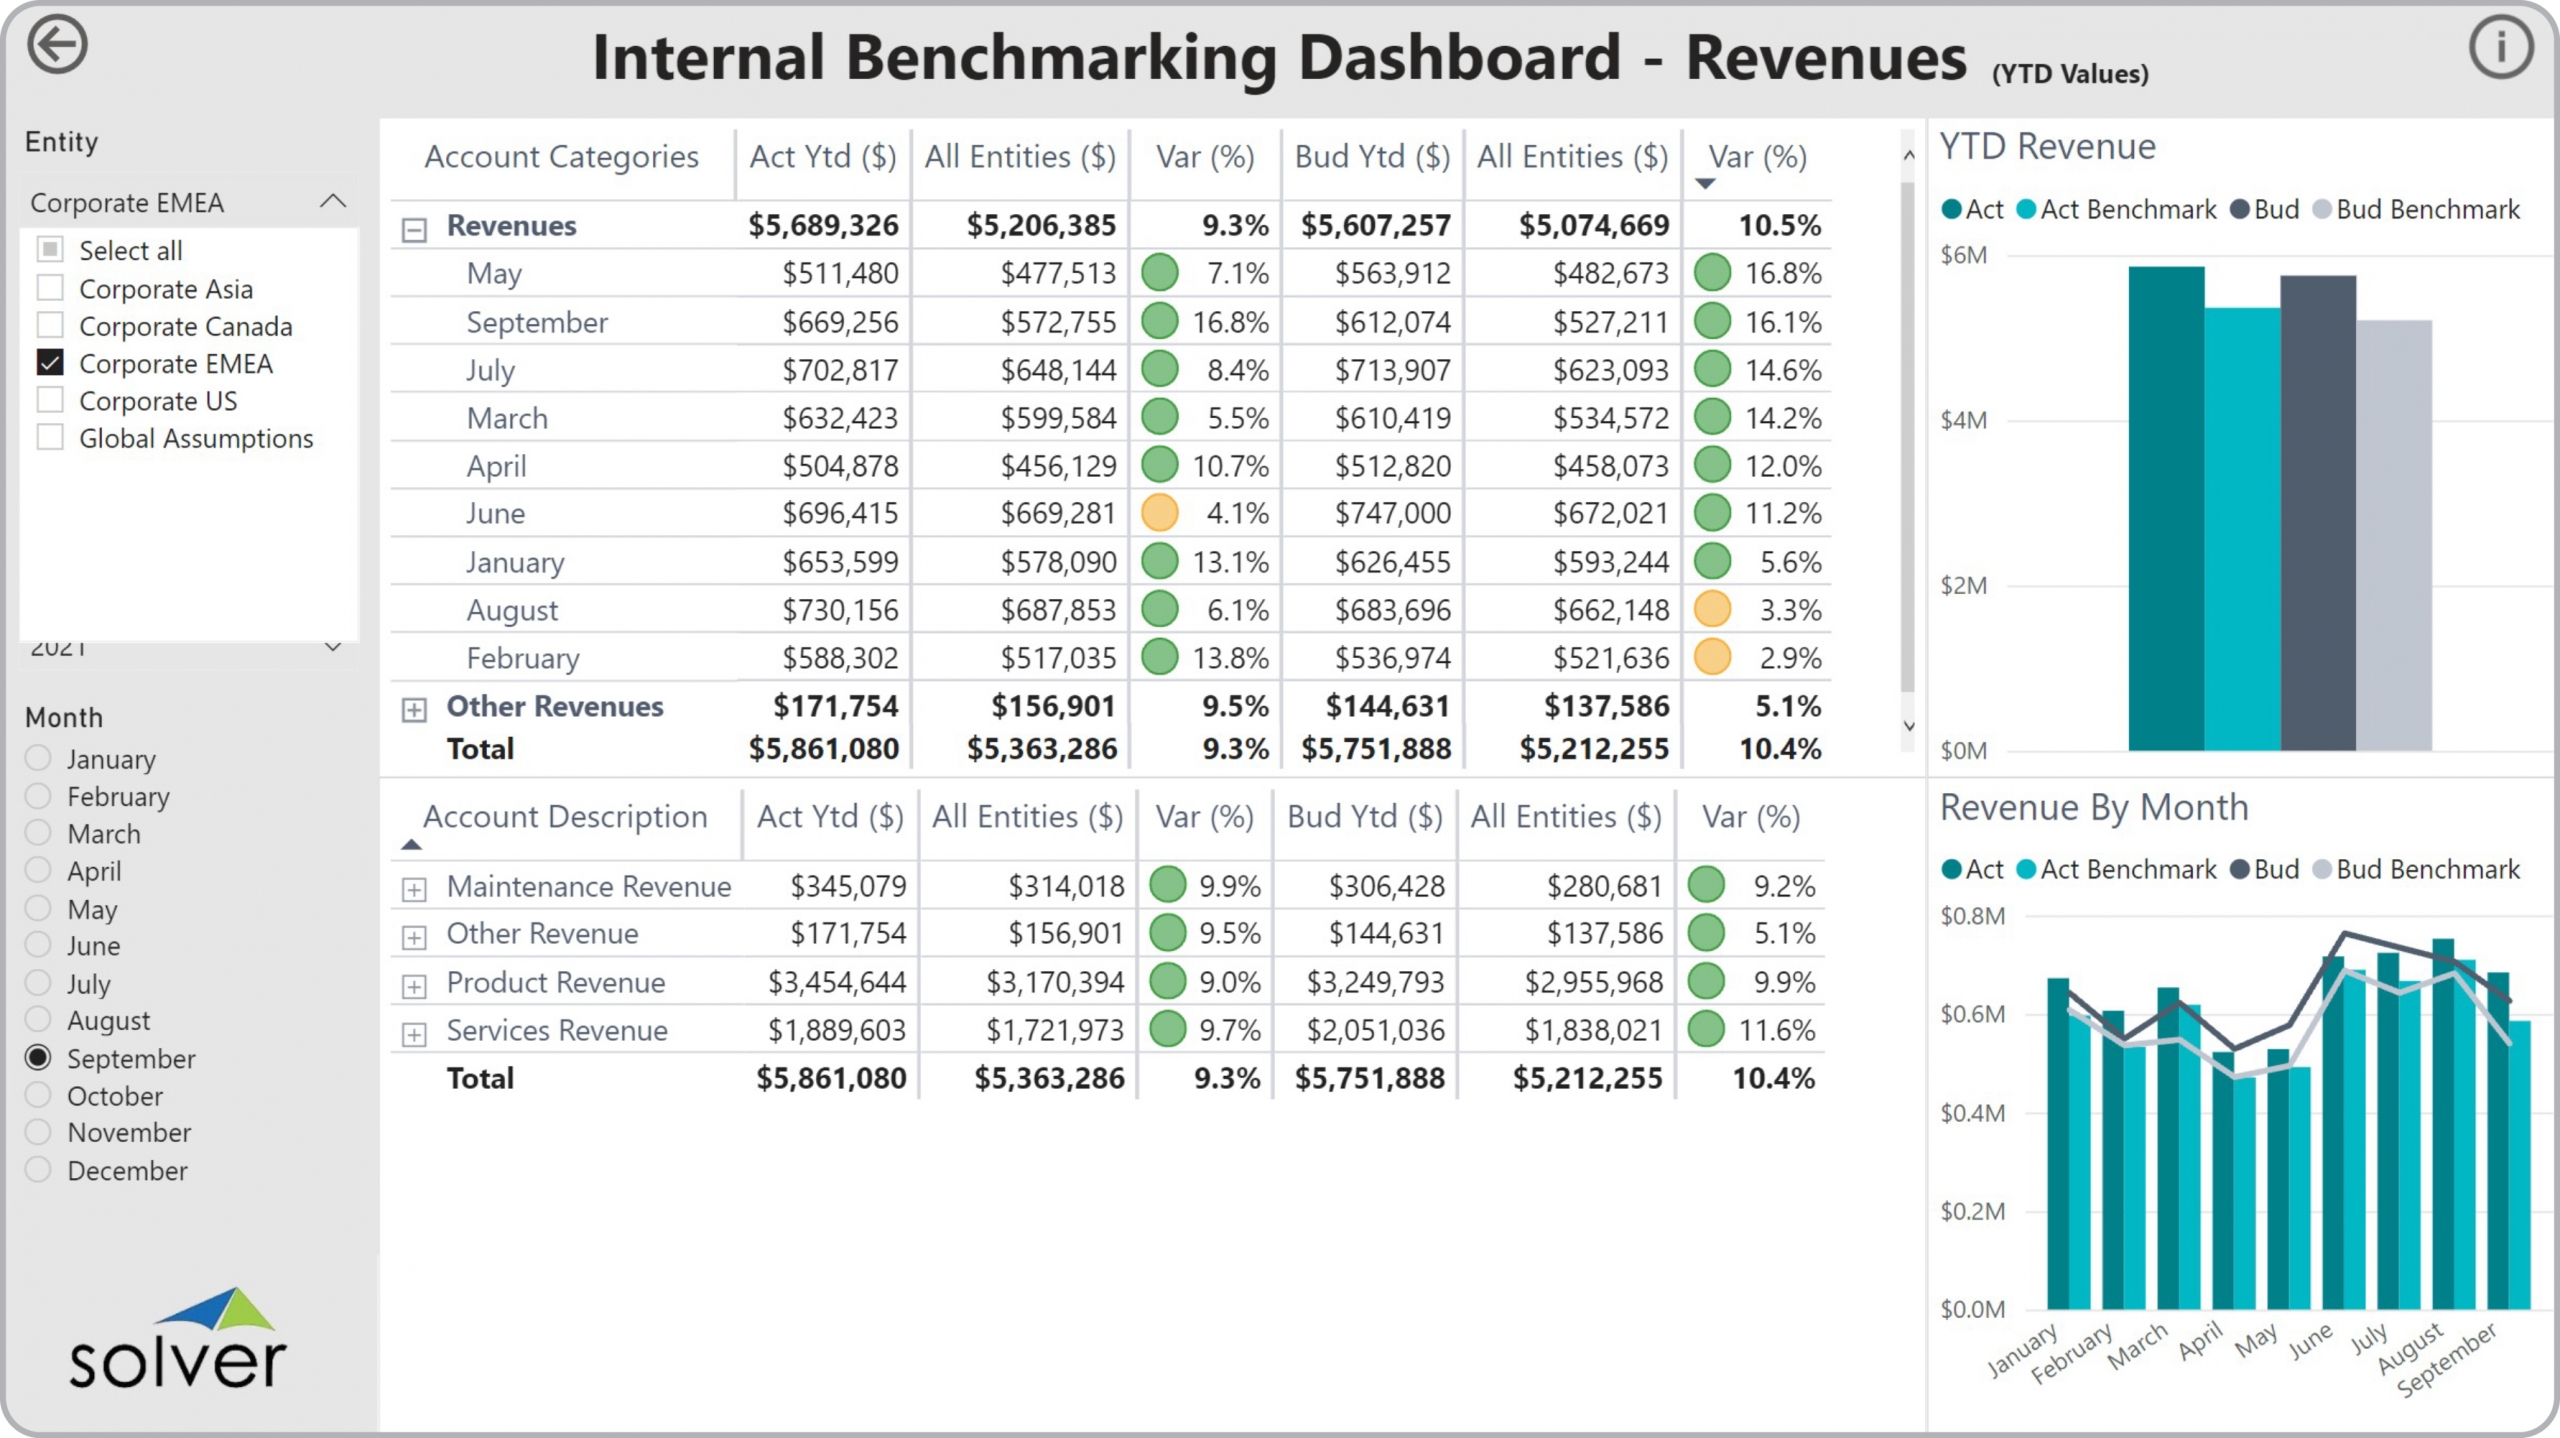 Example of a Revenue Benchmarking Dashboard to Streamline the Monthly Reporting Process